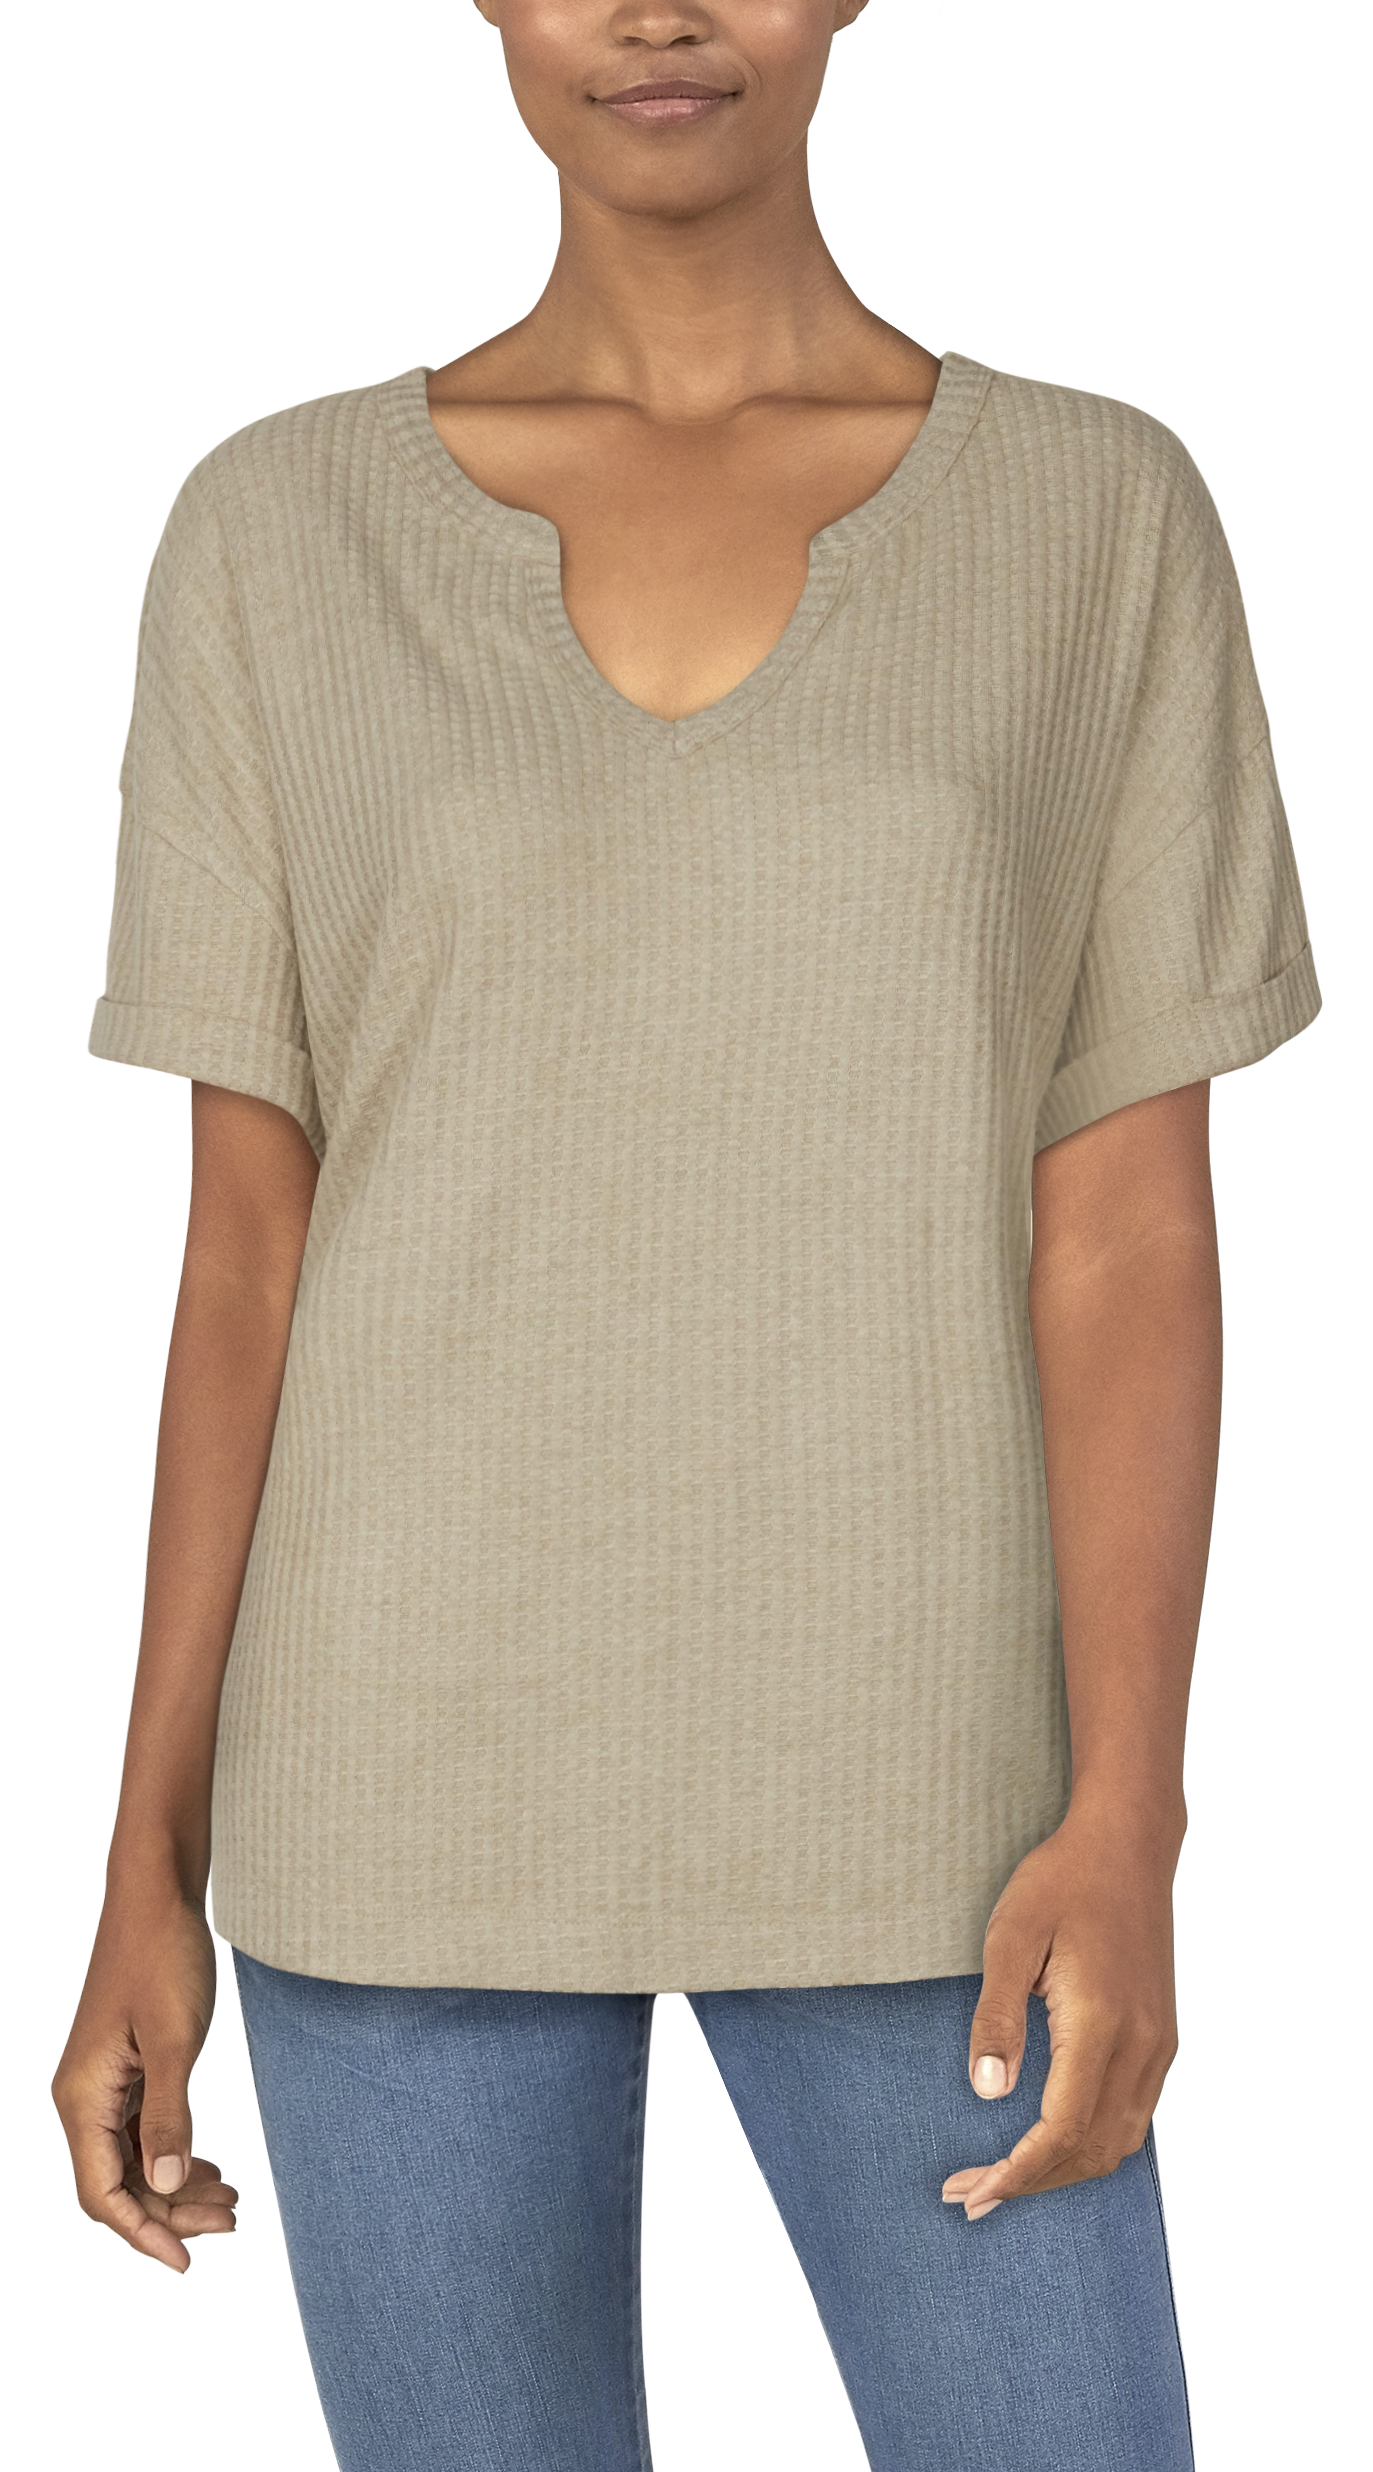 Natural Reflections Brush Creek Waffle Short-Sleeve Shirt for Ladies - Oatmeal Heather - M